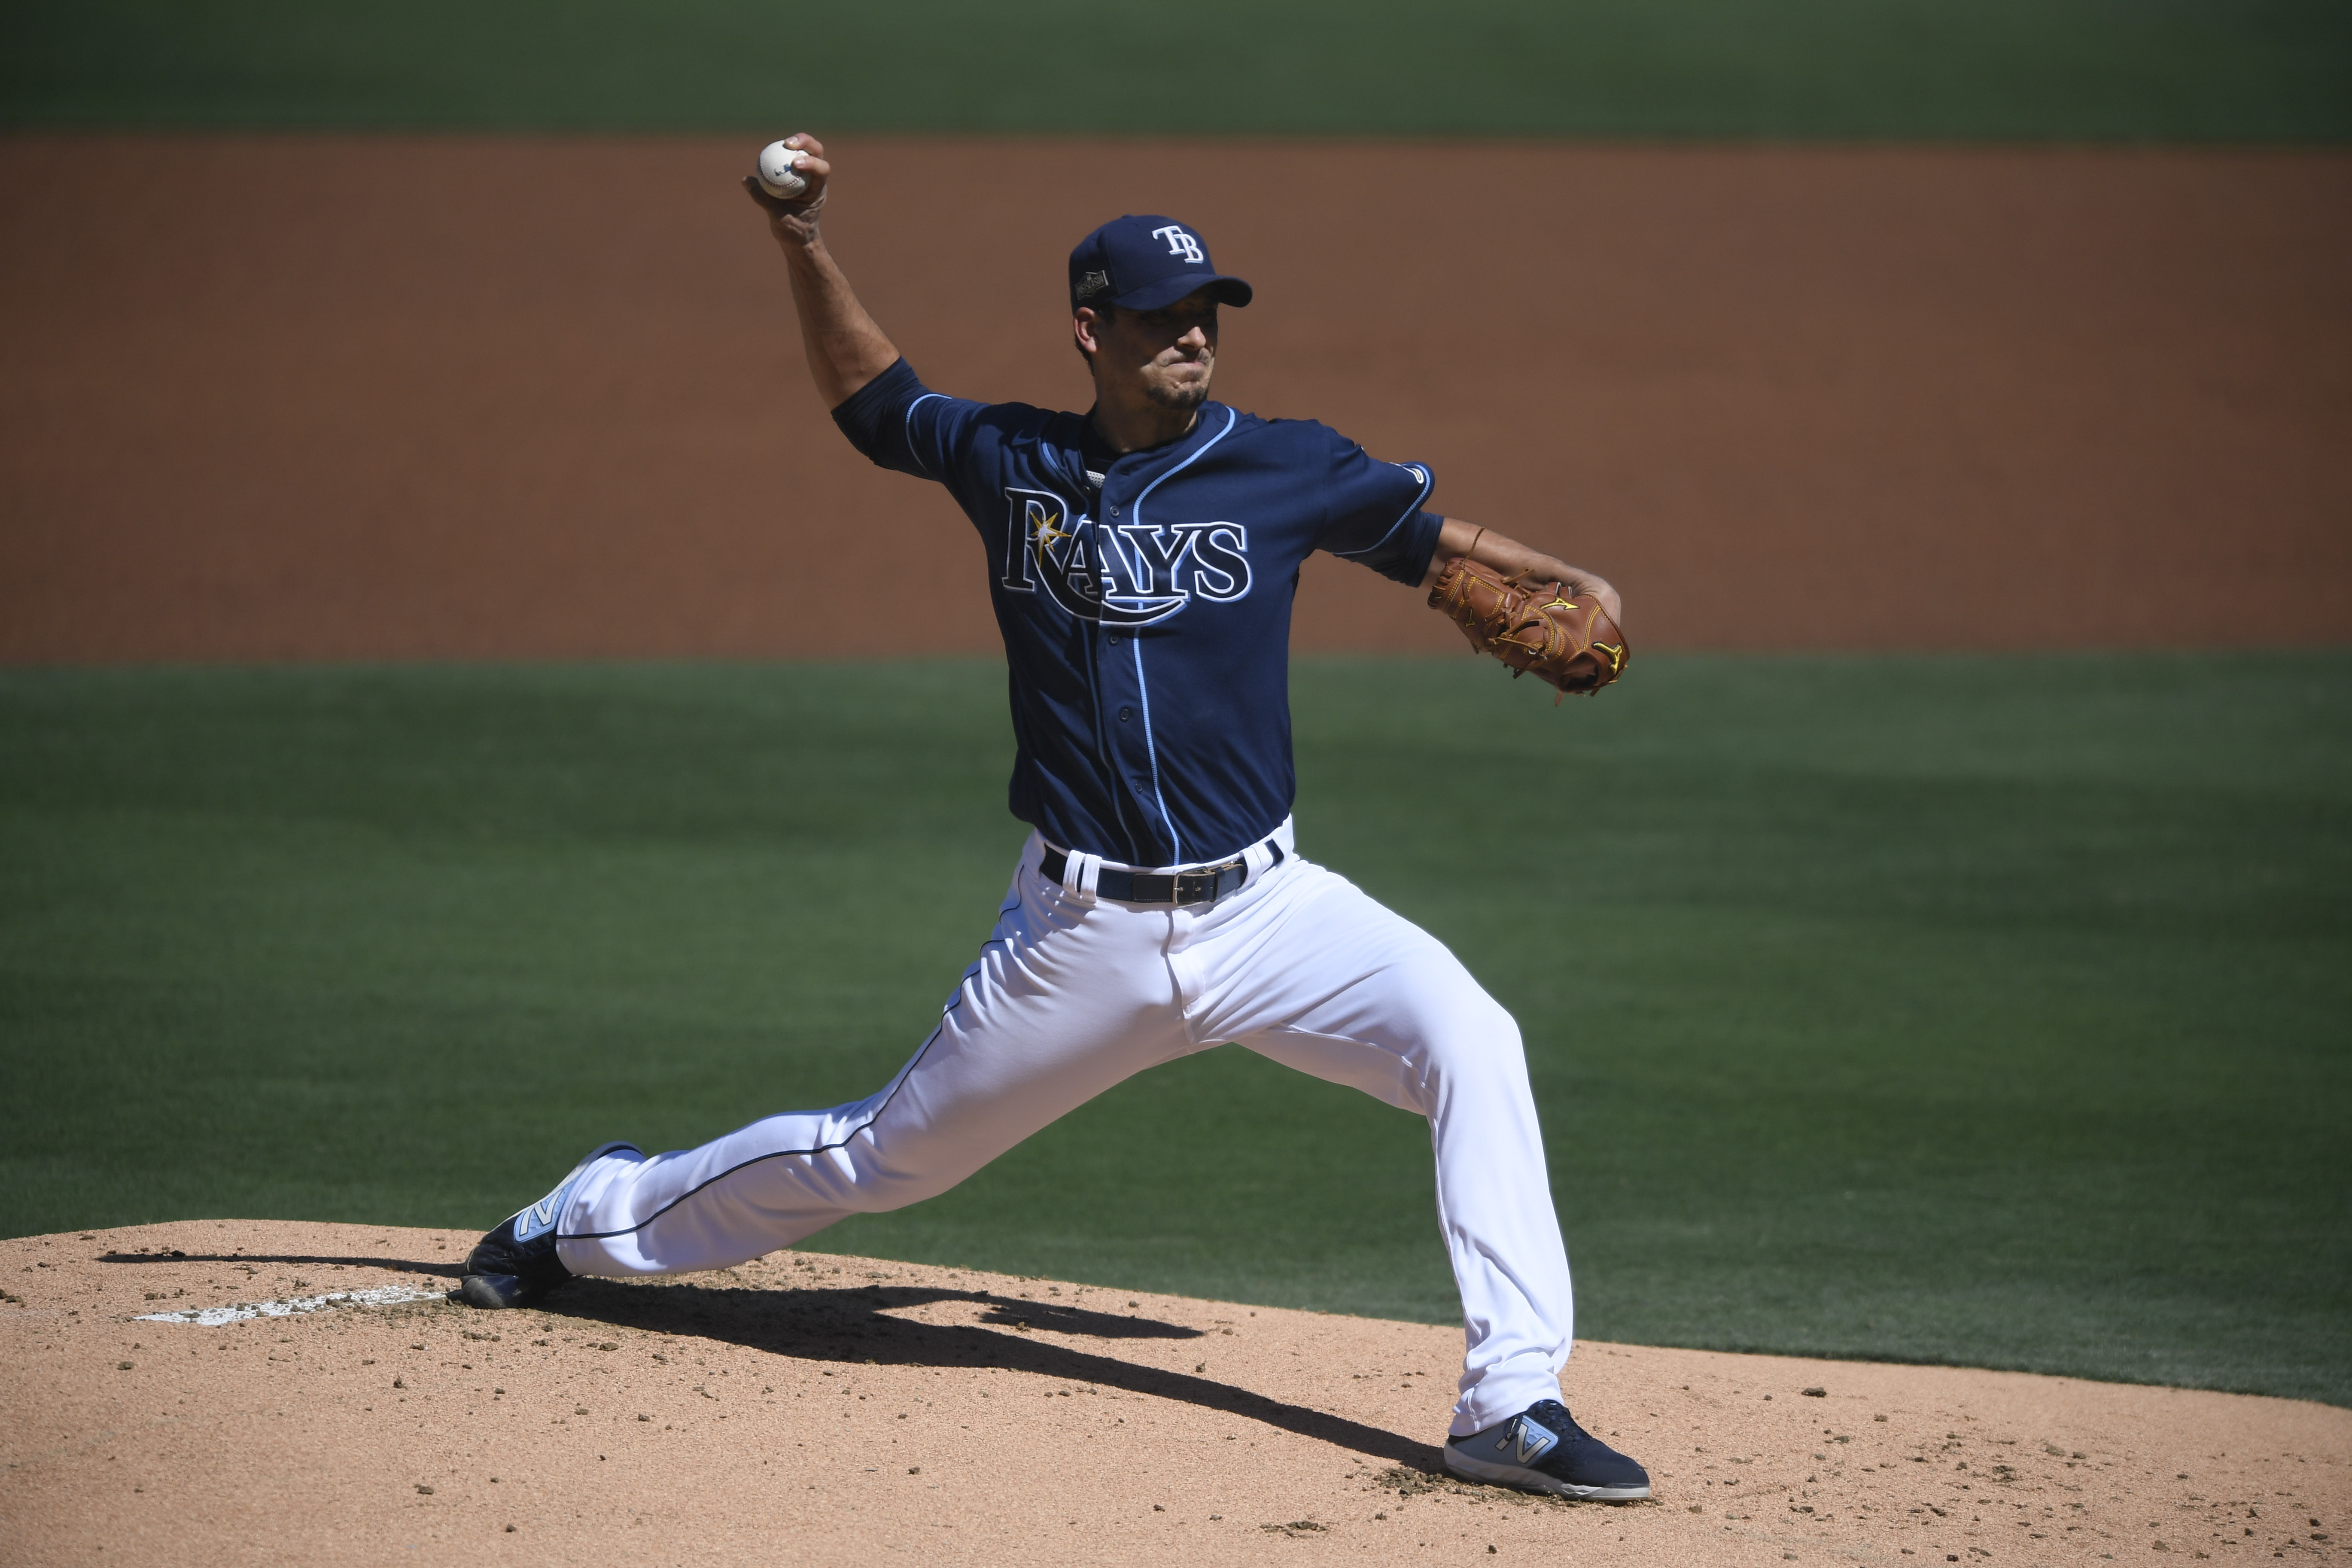 For Rays' Charlie Morton, Game 7s have been his specialty